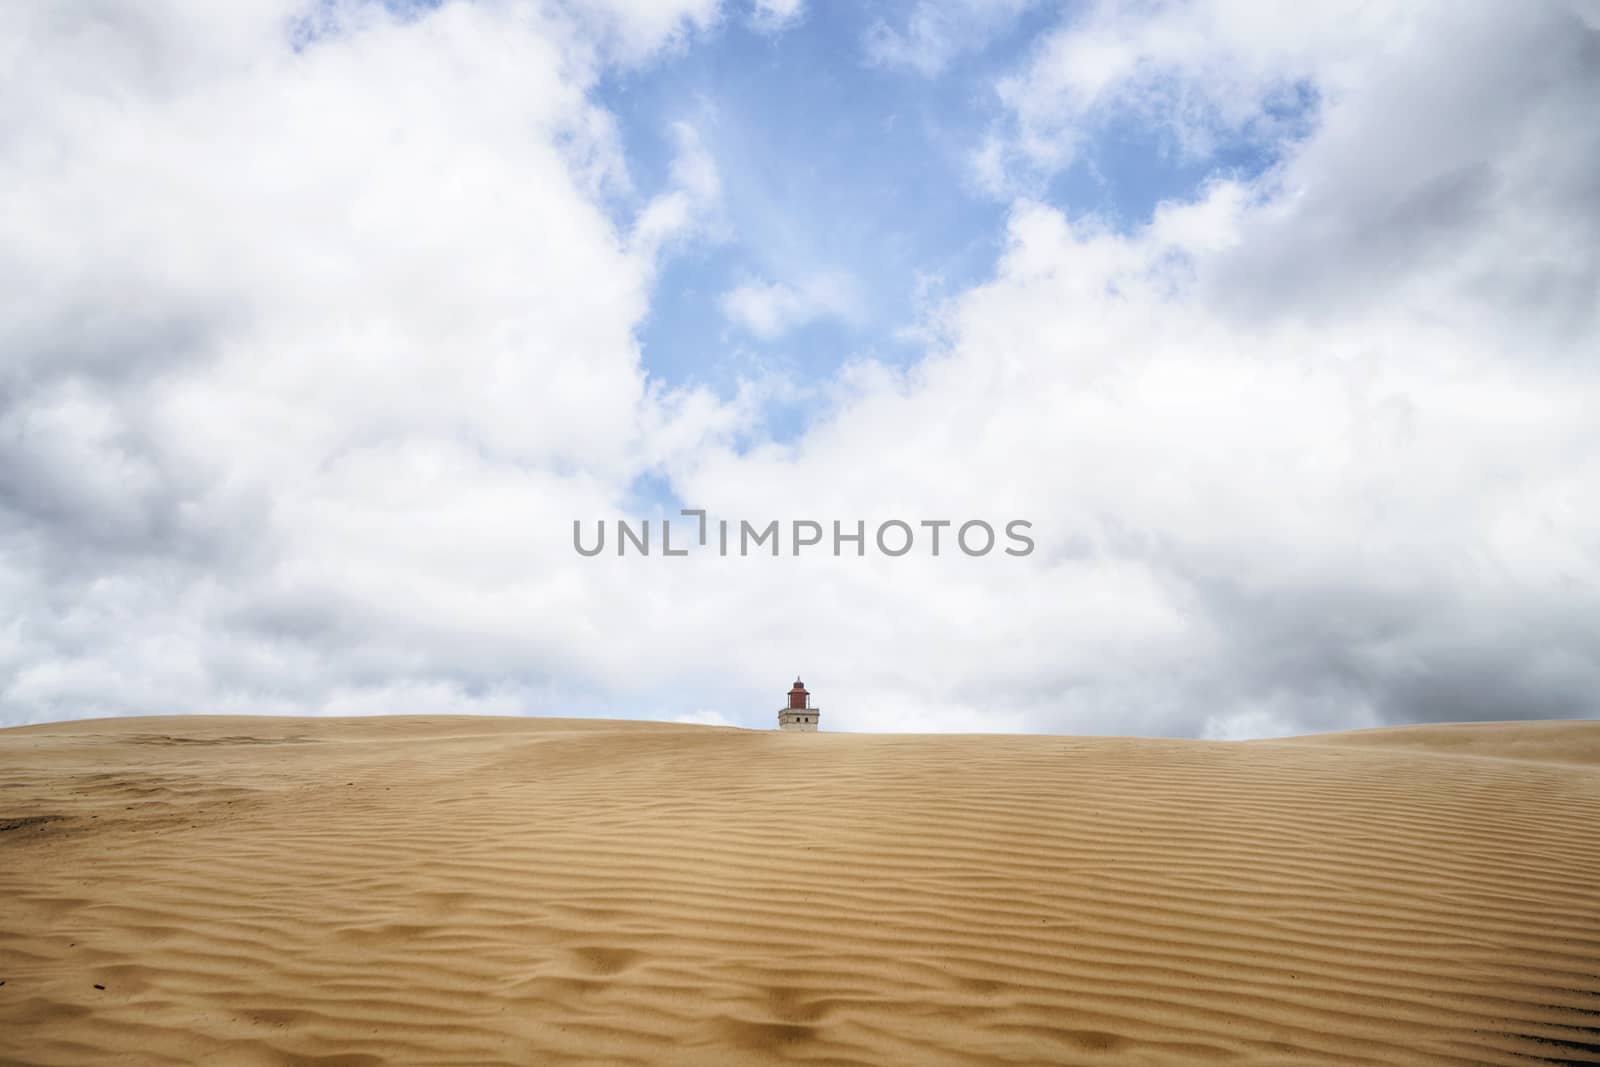 Lighthouse buried in a large sand dune by Sportactive